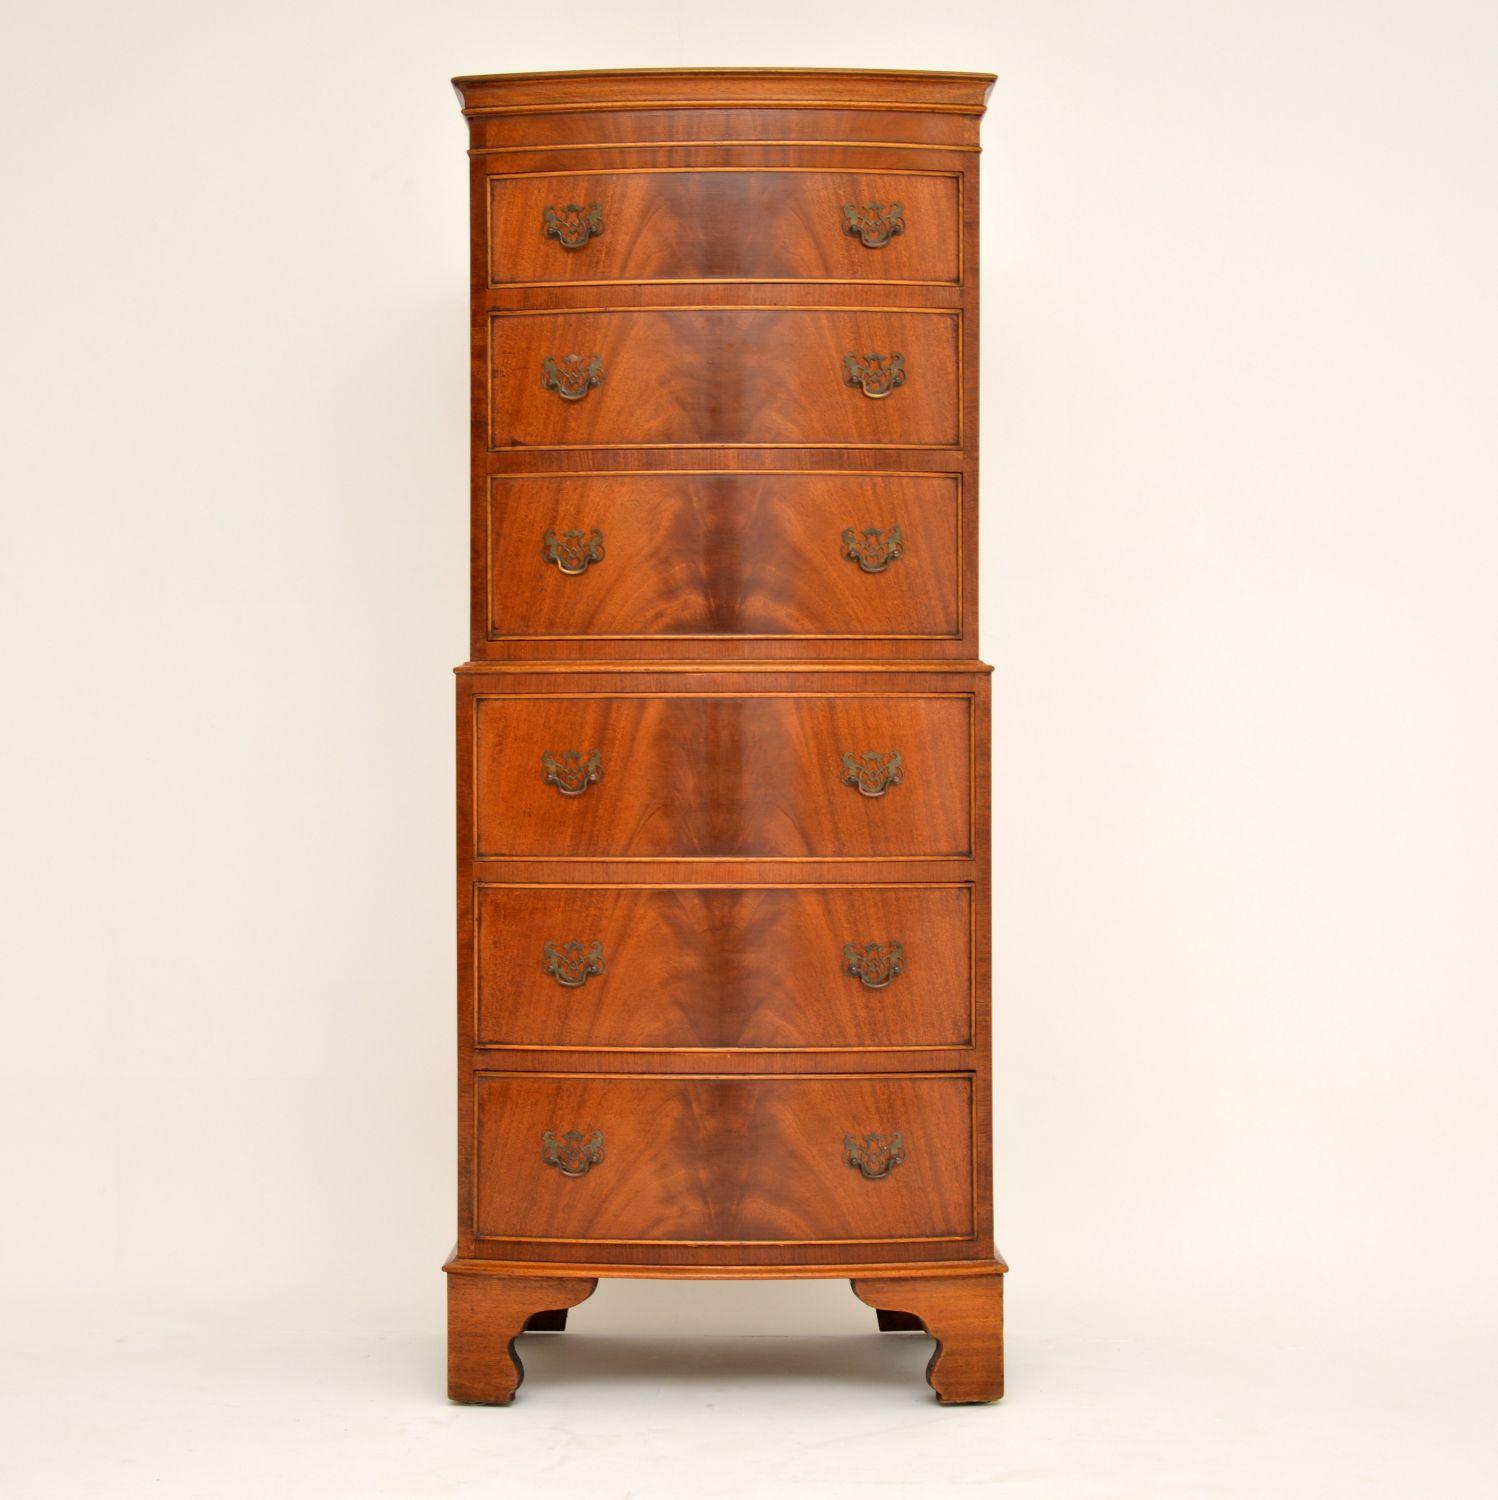 Slim antique Georgian style mahogany chest on chest in excellent condition and dating from the 1930s-1950s period. The flame mahogany drawers are graduated in depth and have original brass handles. This chest of drawers is bow fronted & sits on